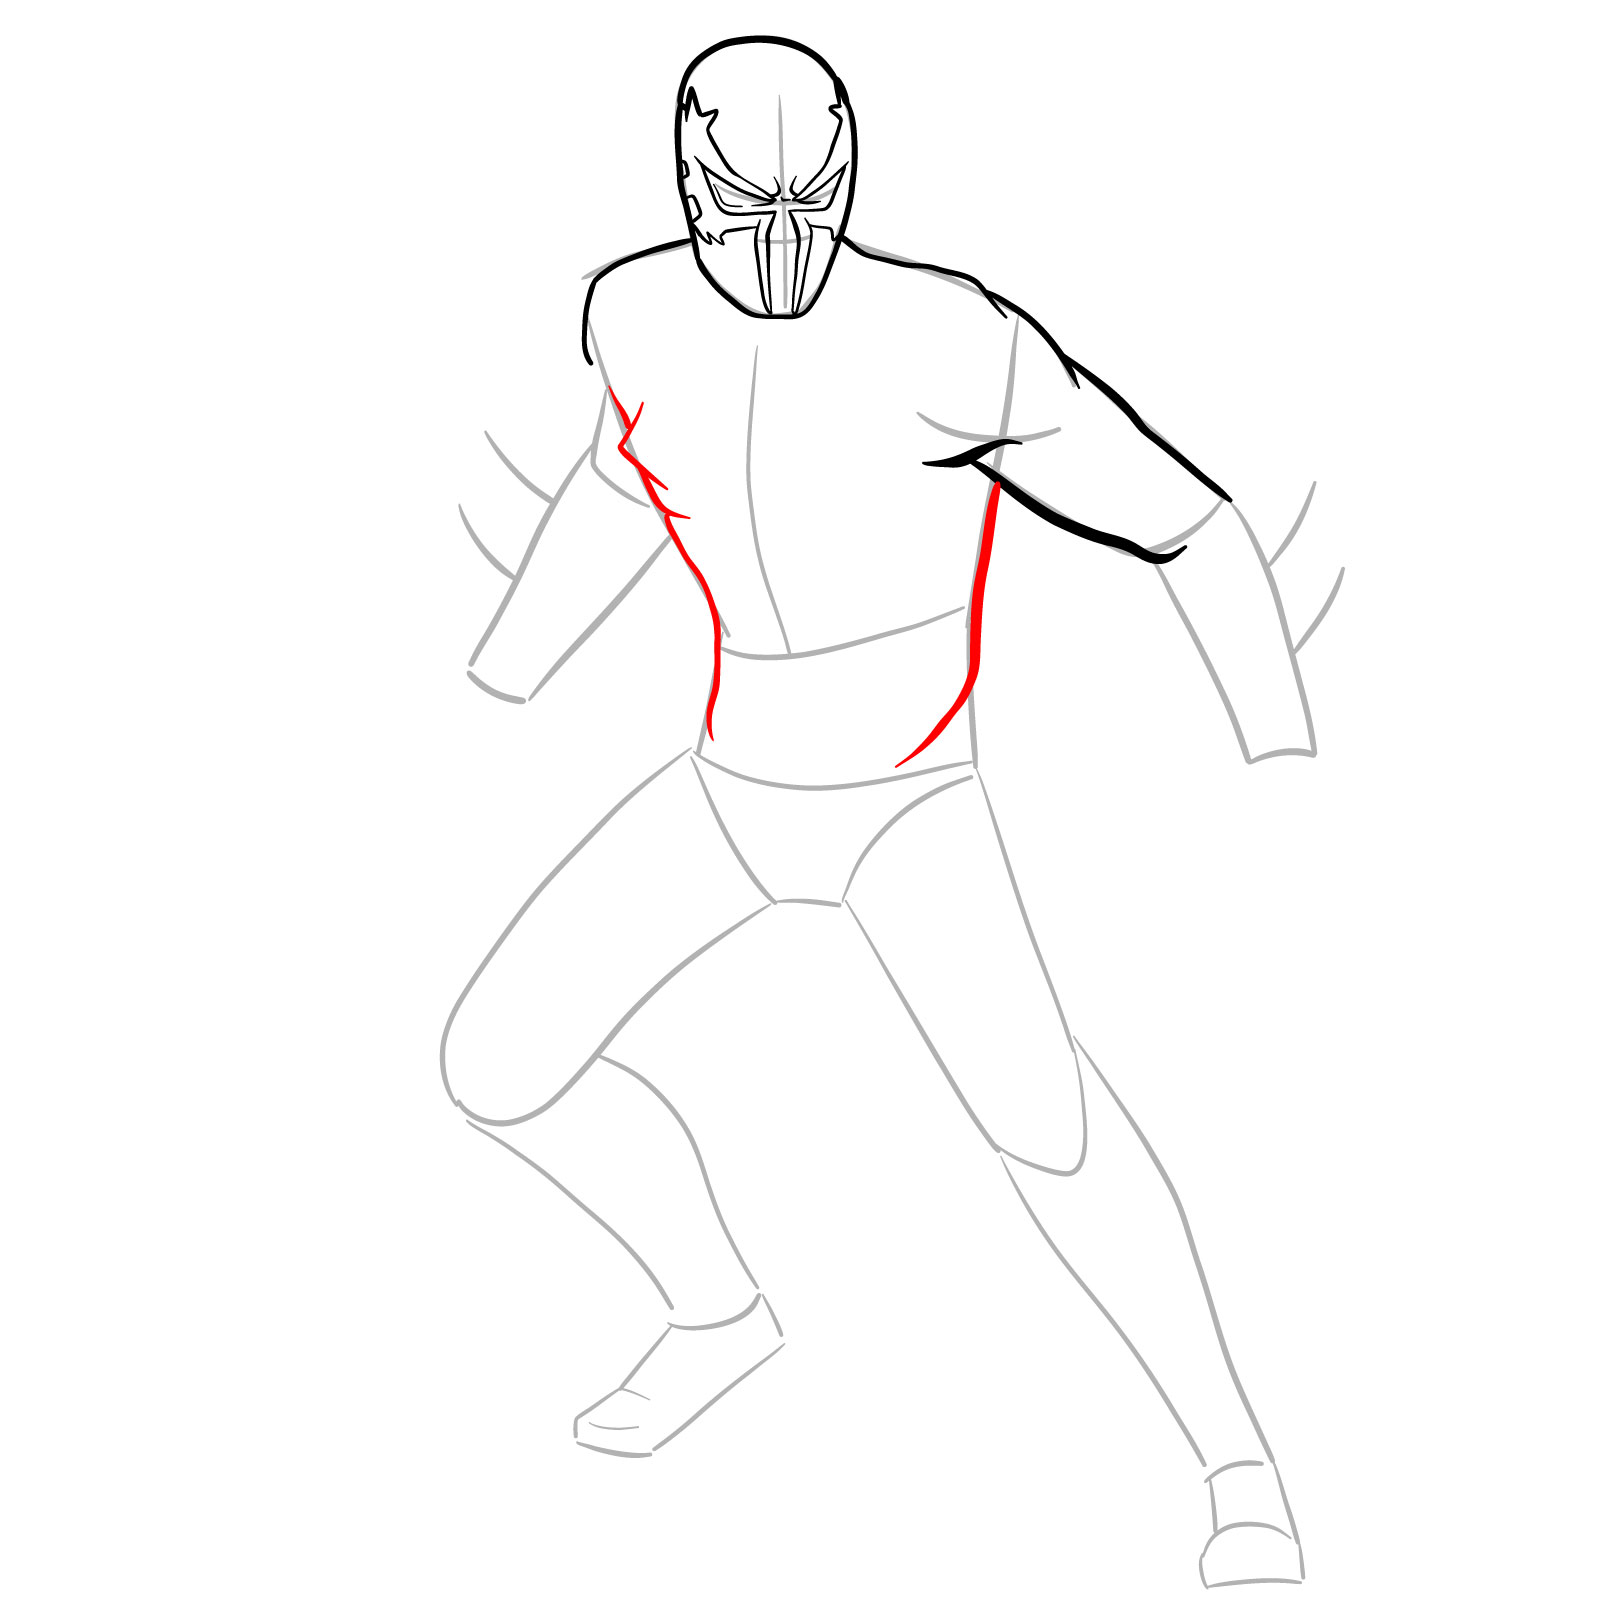 How to draw Spider-Man 2099 - step 13